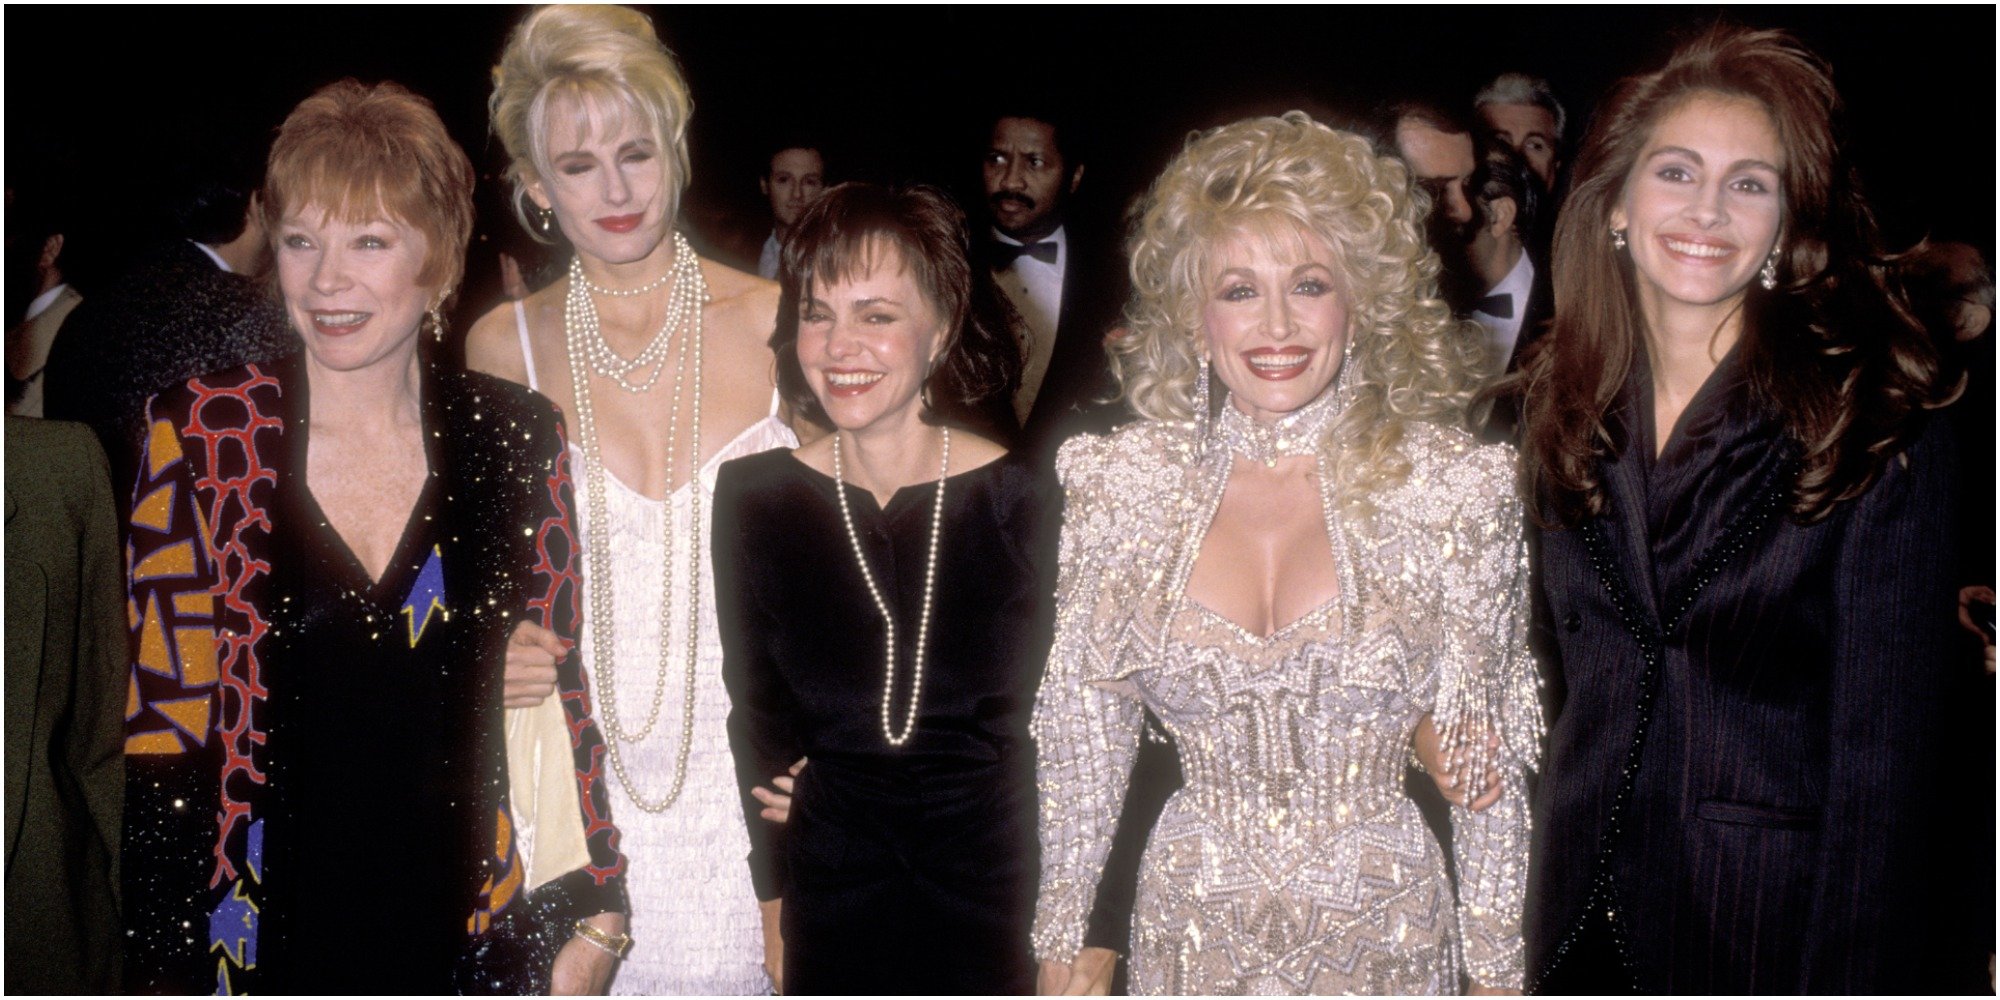 Shirley MacLaine, Daryl Hannah, Sally Field, Dolly Parton and Julia Roberts appear during the red carpet for Steel Magnolias in 1989.